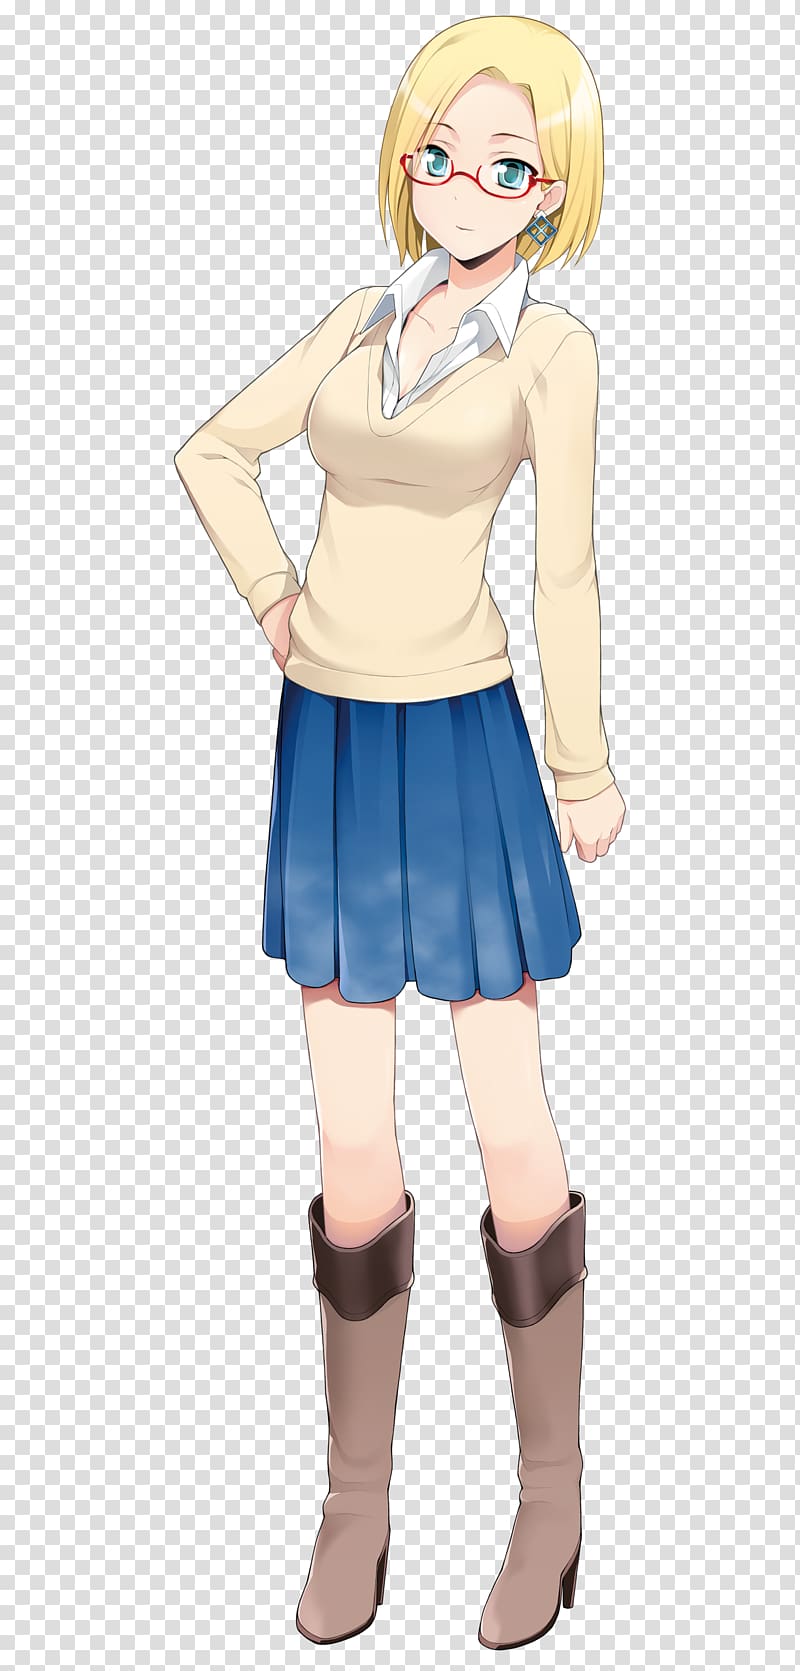 Microsoft Azure クラウディア・窓辺 OS-tan Character, megane transparent background PNG clipart